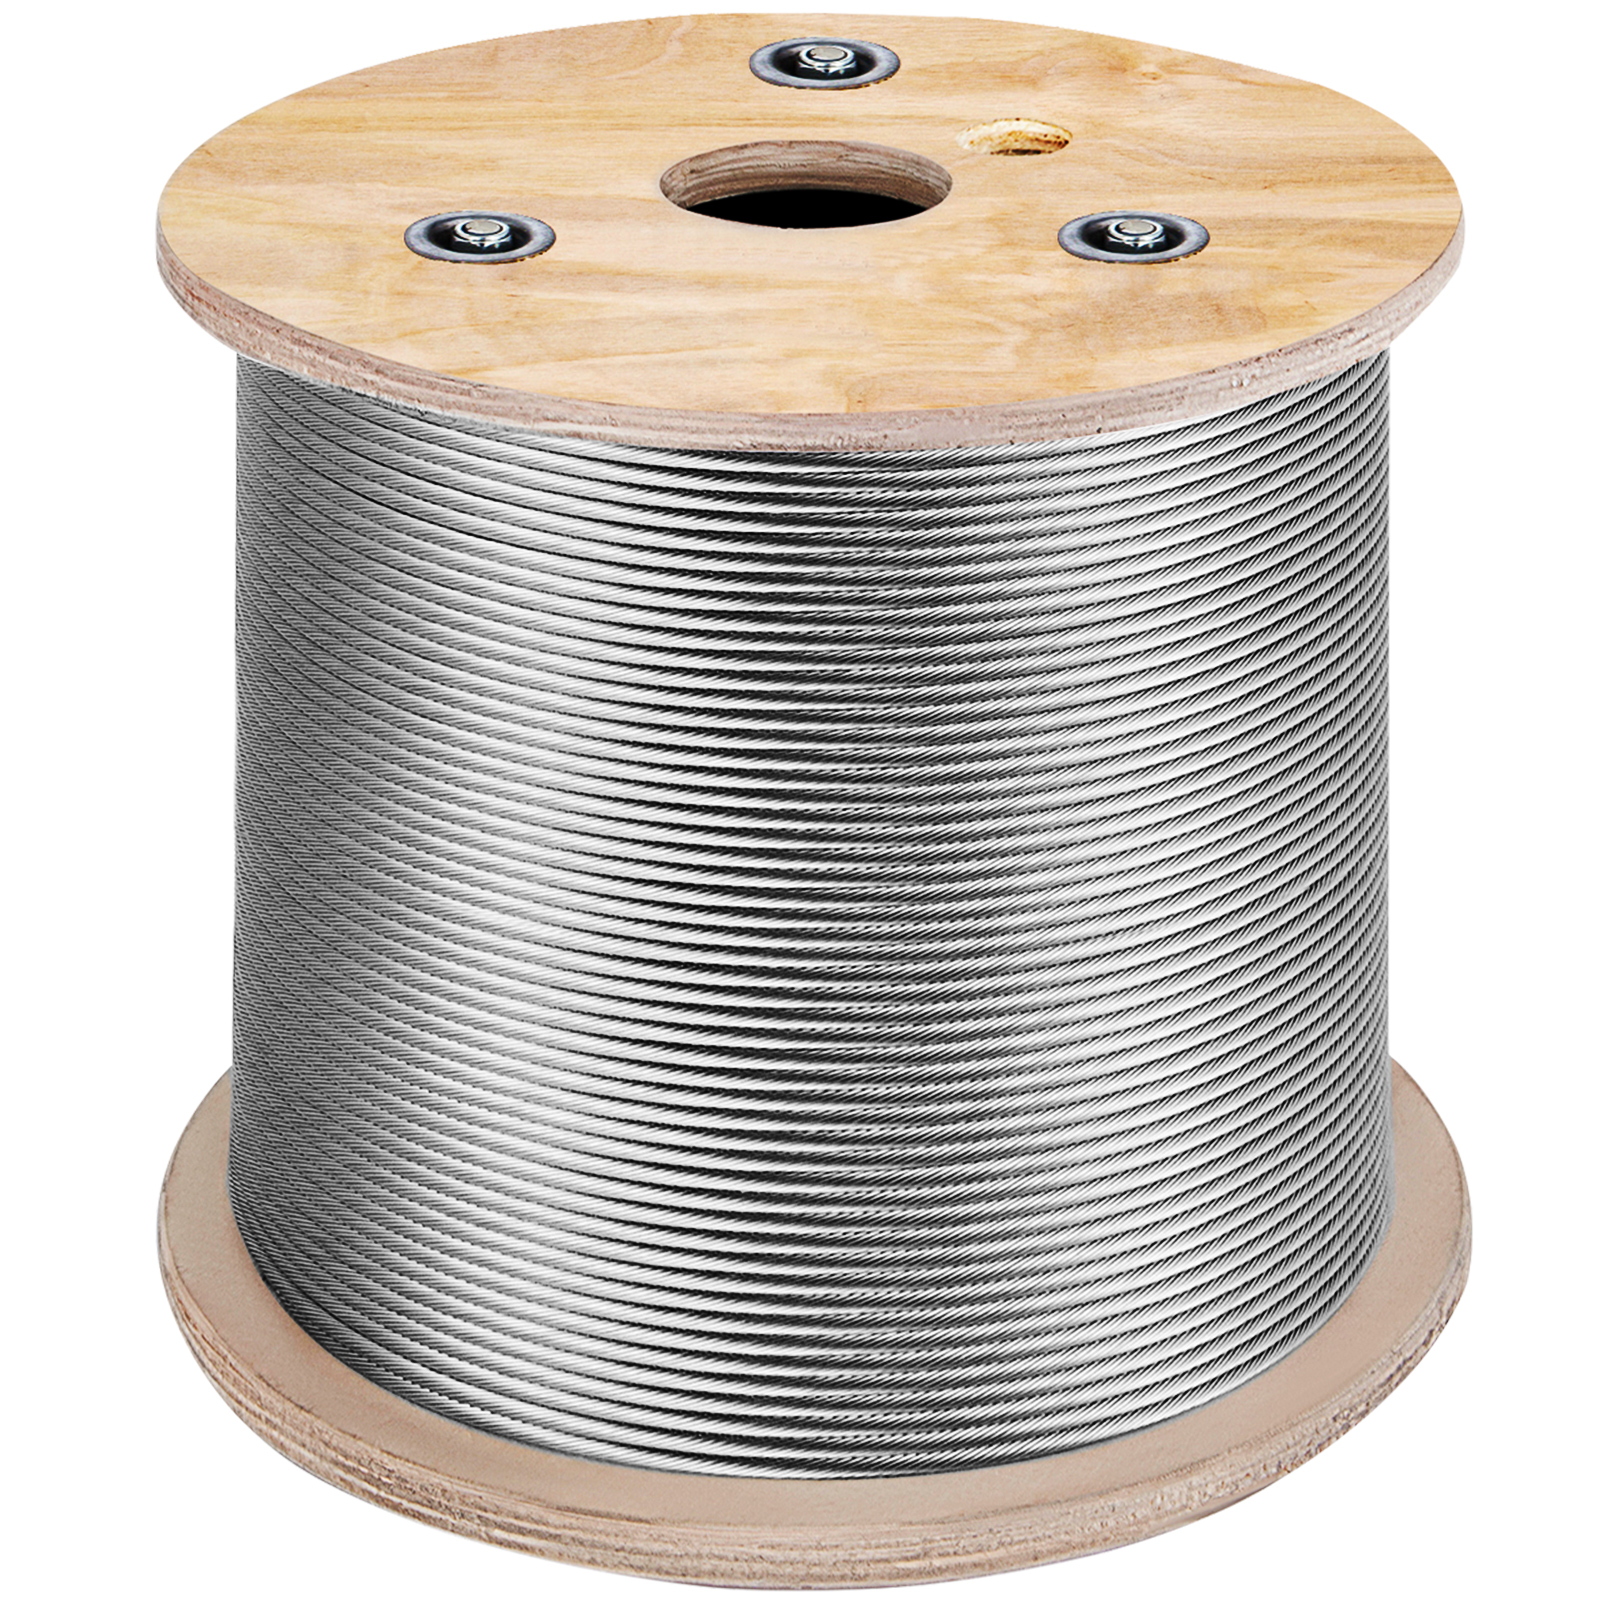 3/16 7x19 Stainless Steel Cable 500ft Reel (t304) от Vevor Many GEOs